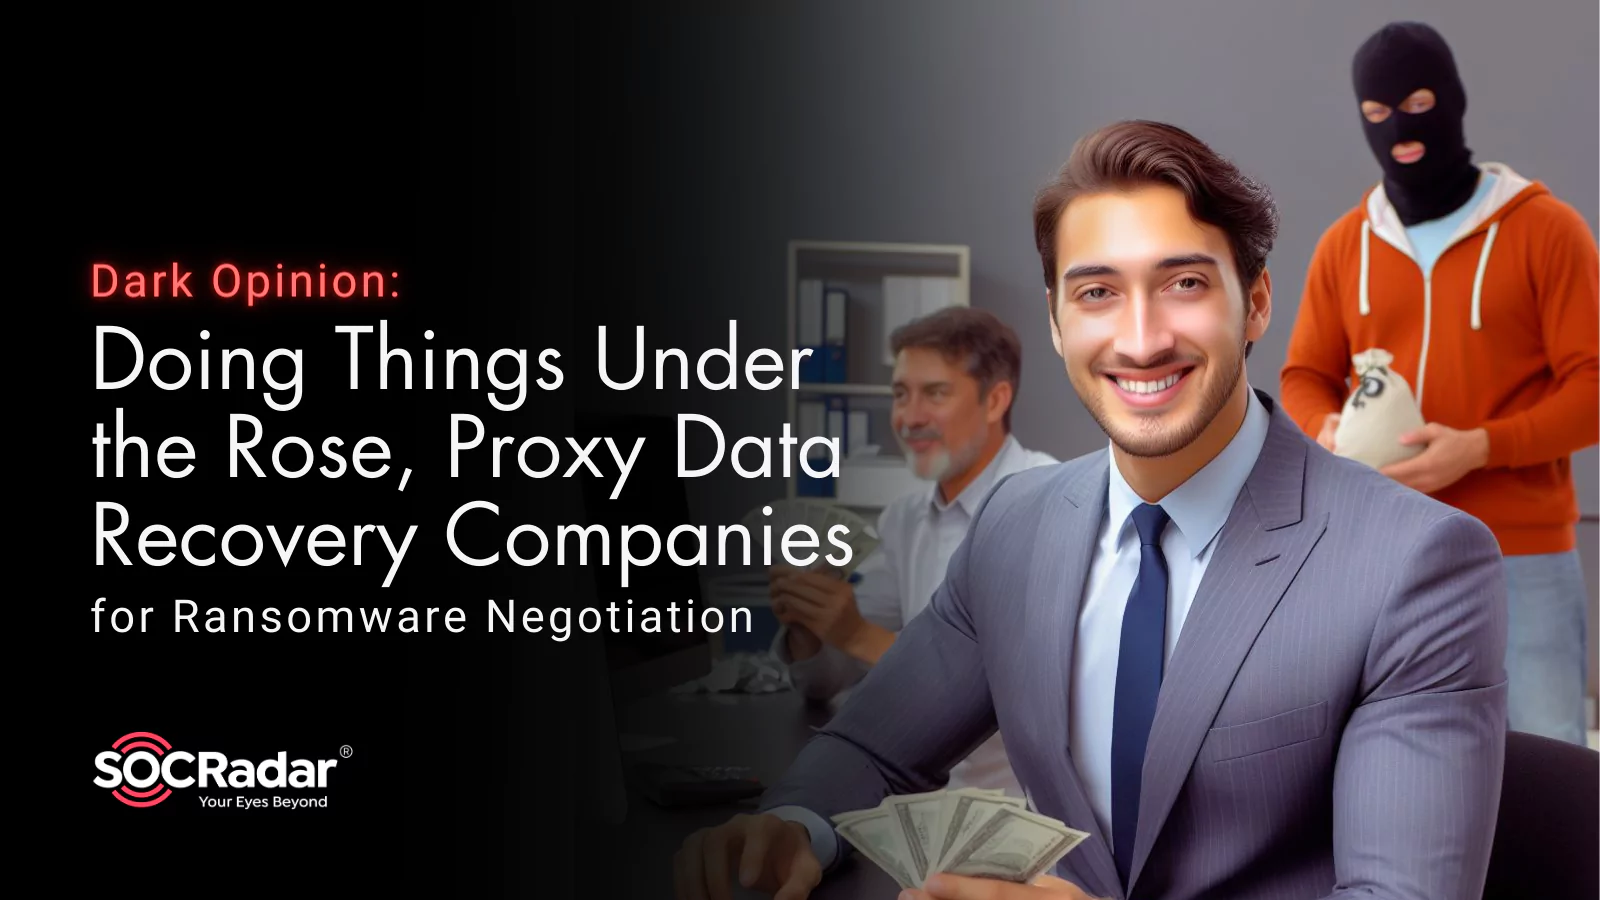 SOCRadar® Cyber Intelligence Inc. | Dark Opinion: Doing Things Under the Rose, Proxy Data Recovery Companies for Ransomware Negotiation